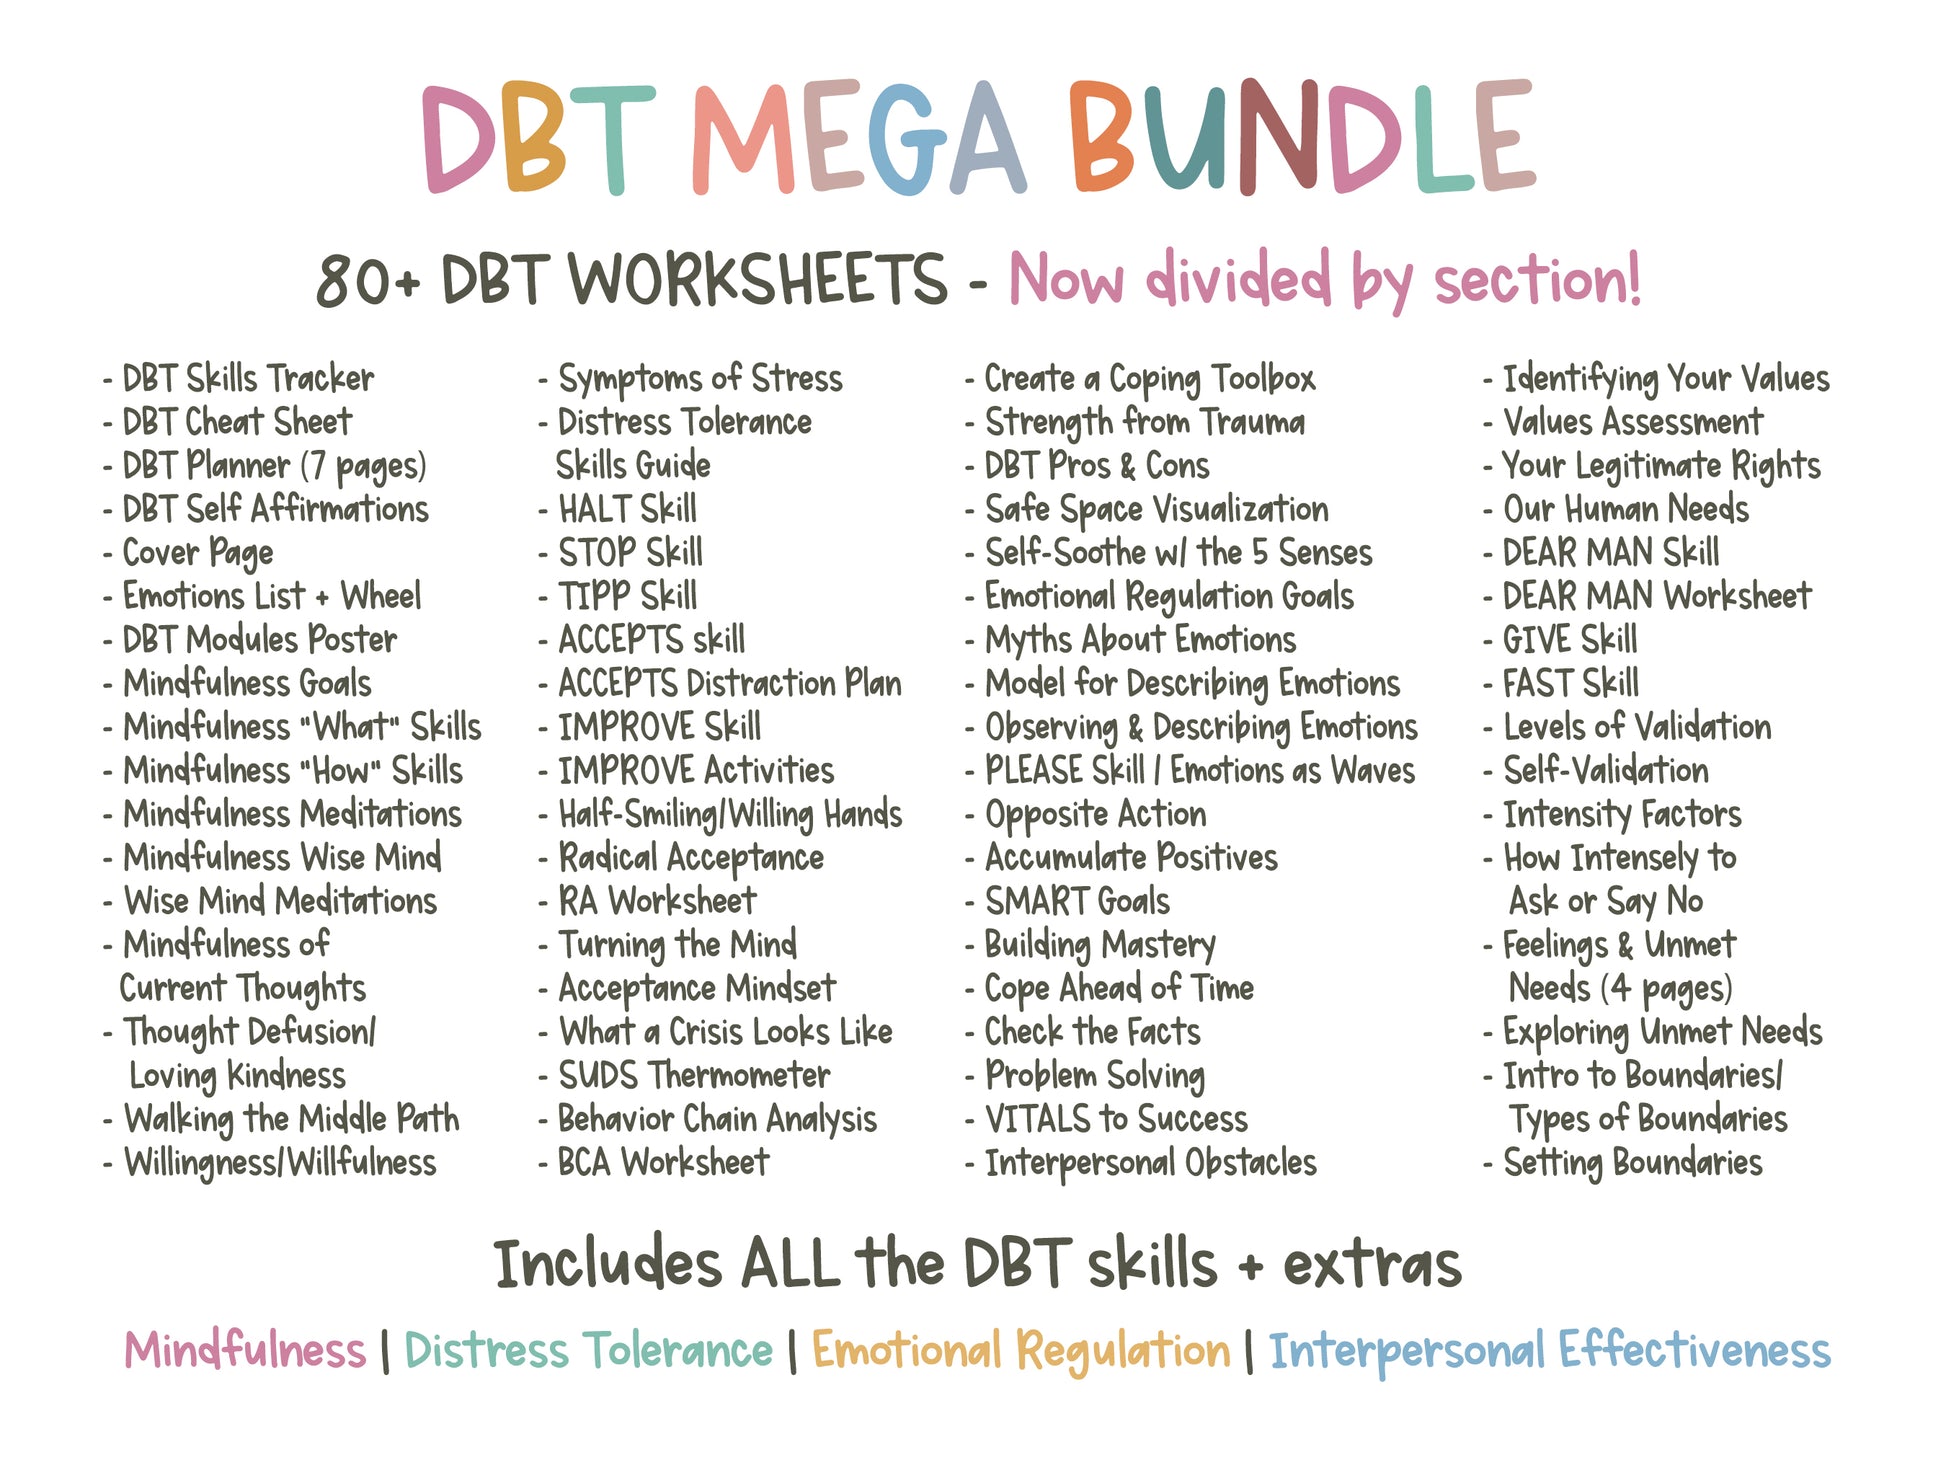 Includes ALL the DBT skills plus extras